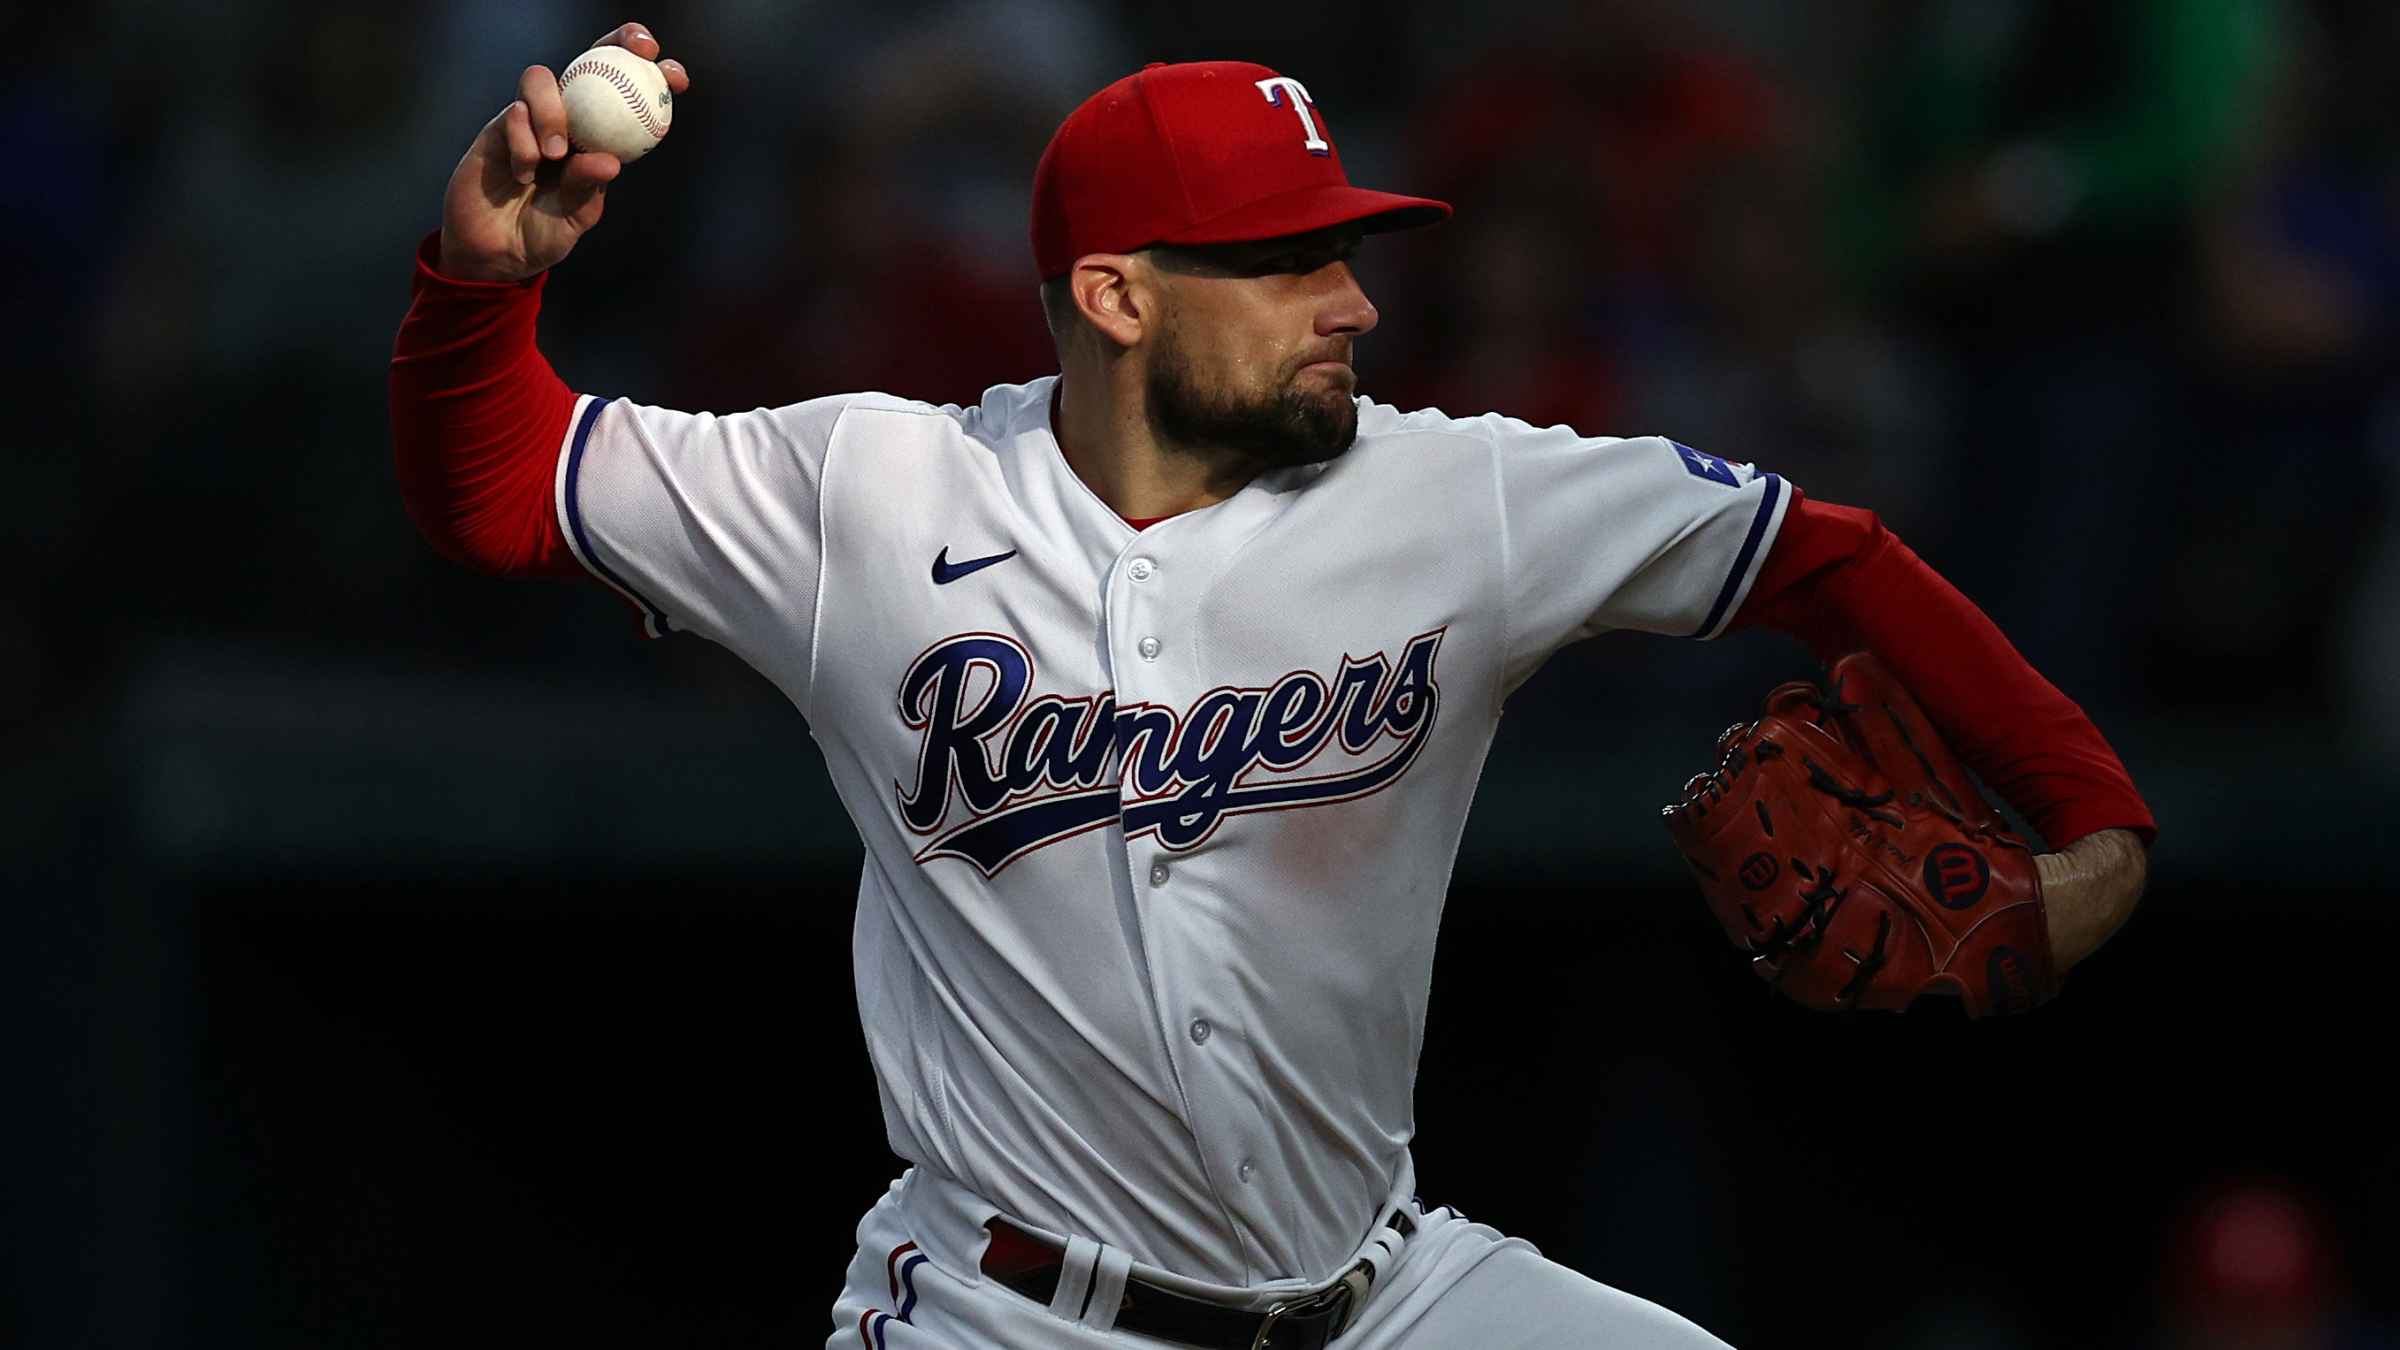 Did Texas native Nathan Eovaldi ever dream he'd play for the Rangers?